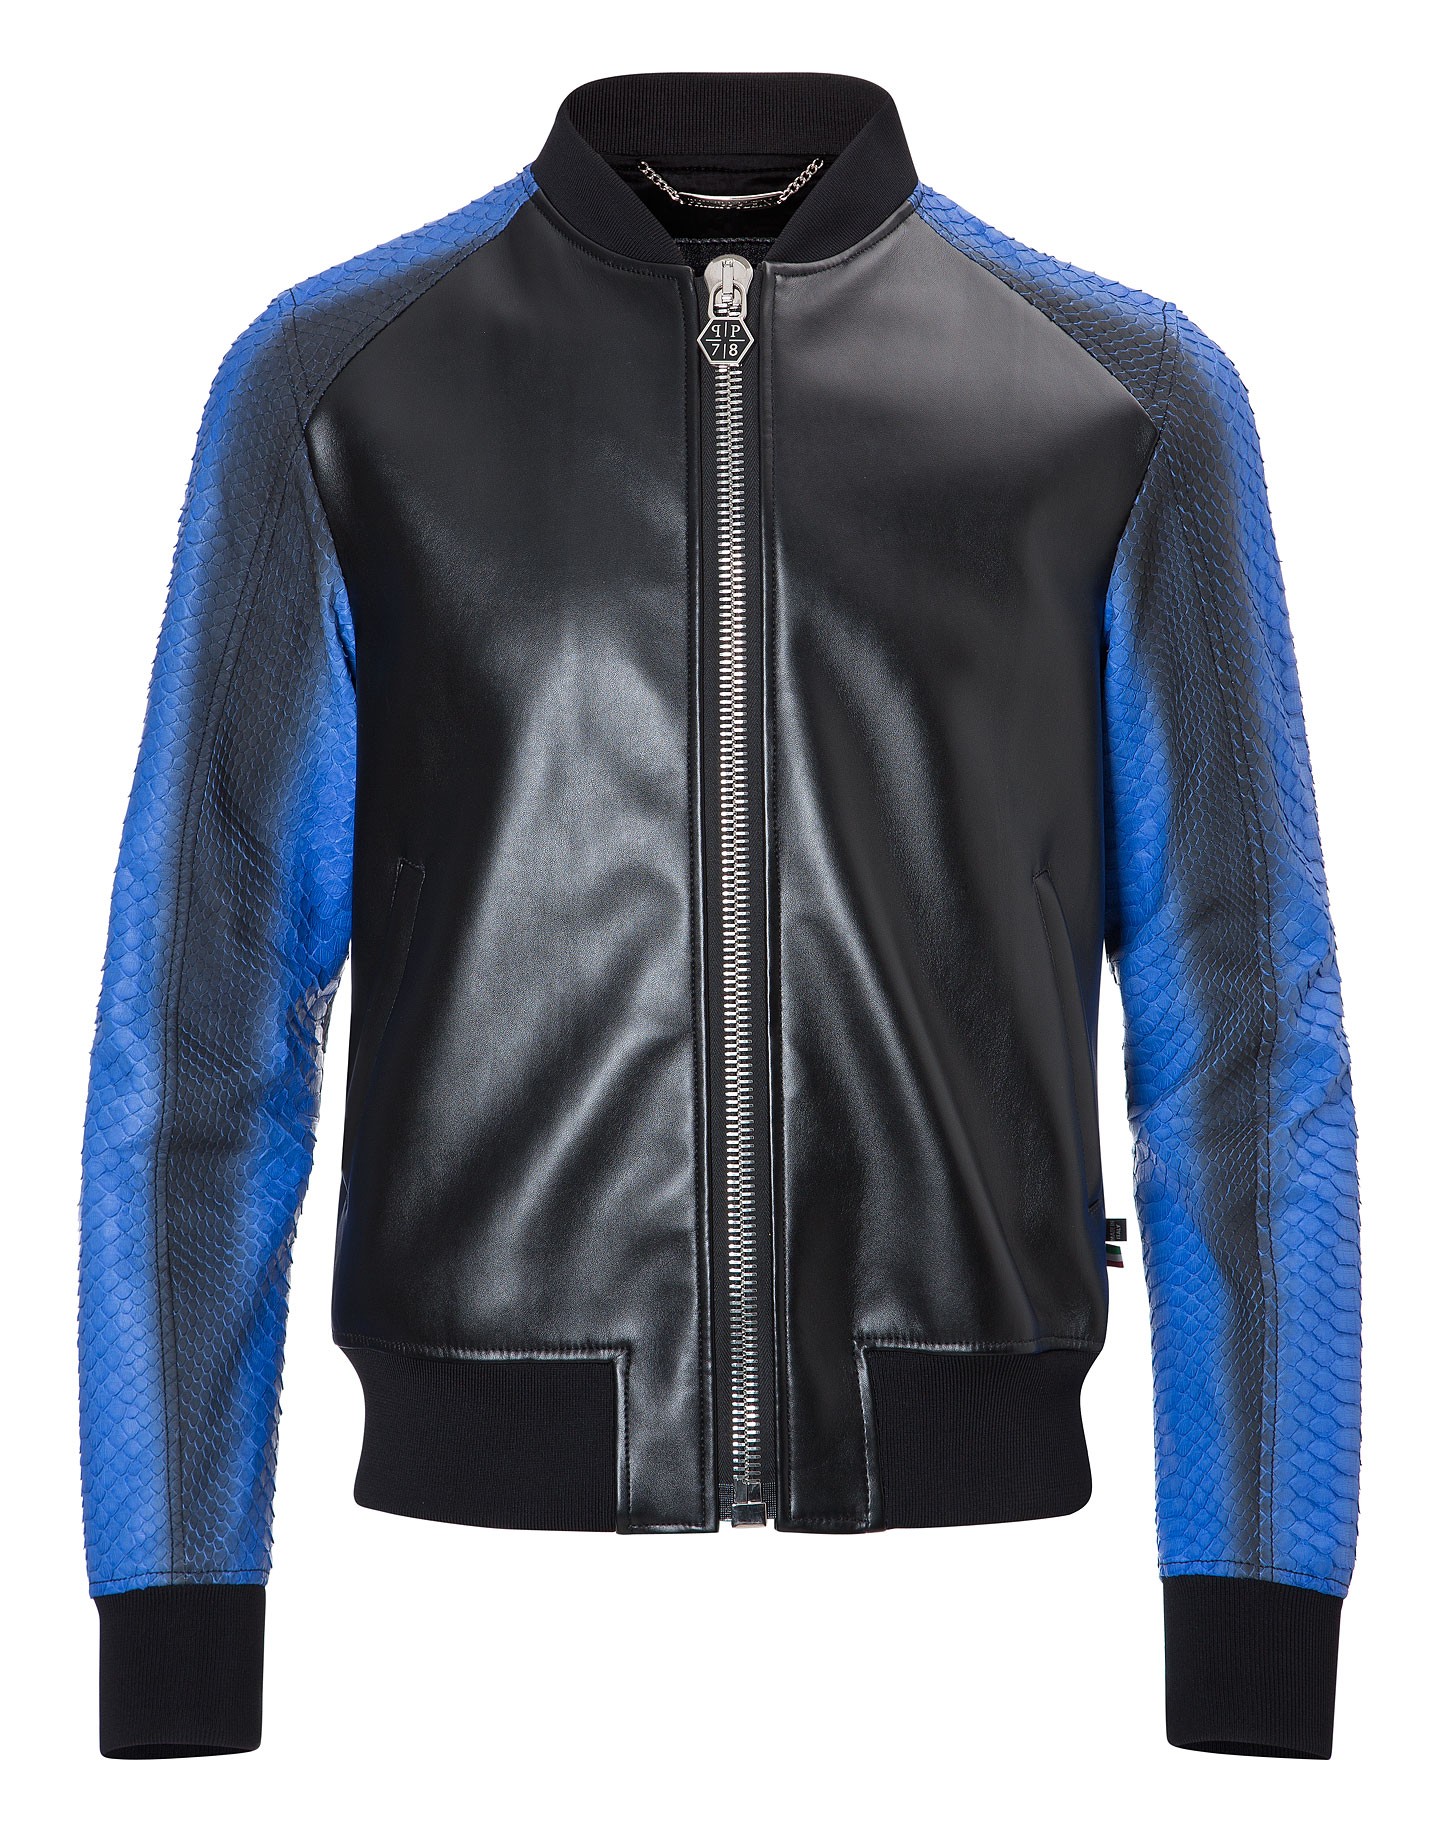 MADE TO ORDER SNAKE SKIN BOMBER WITH LAMBSKIN